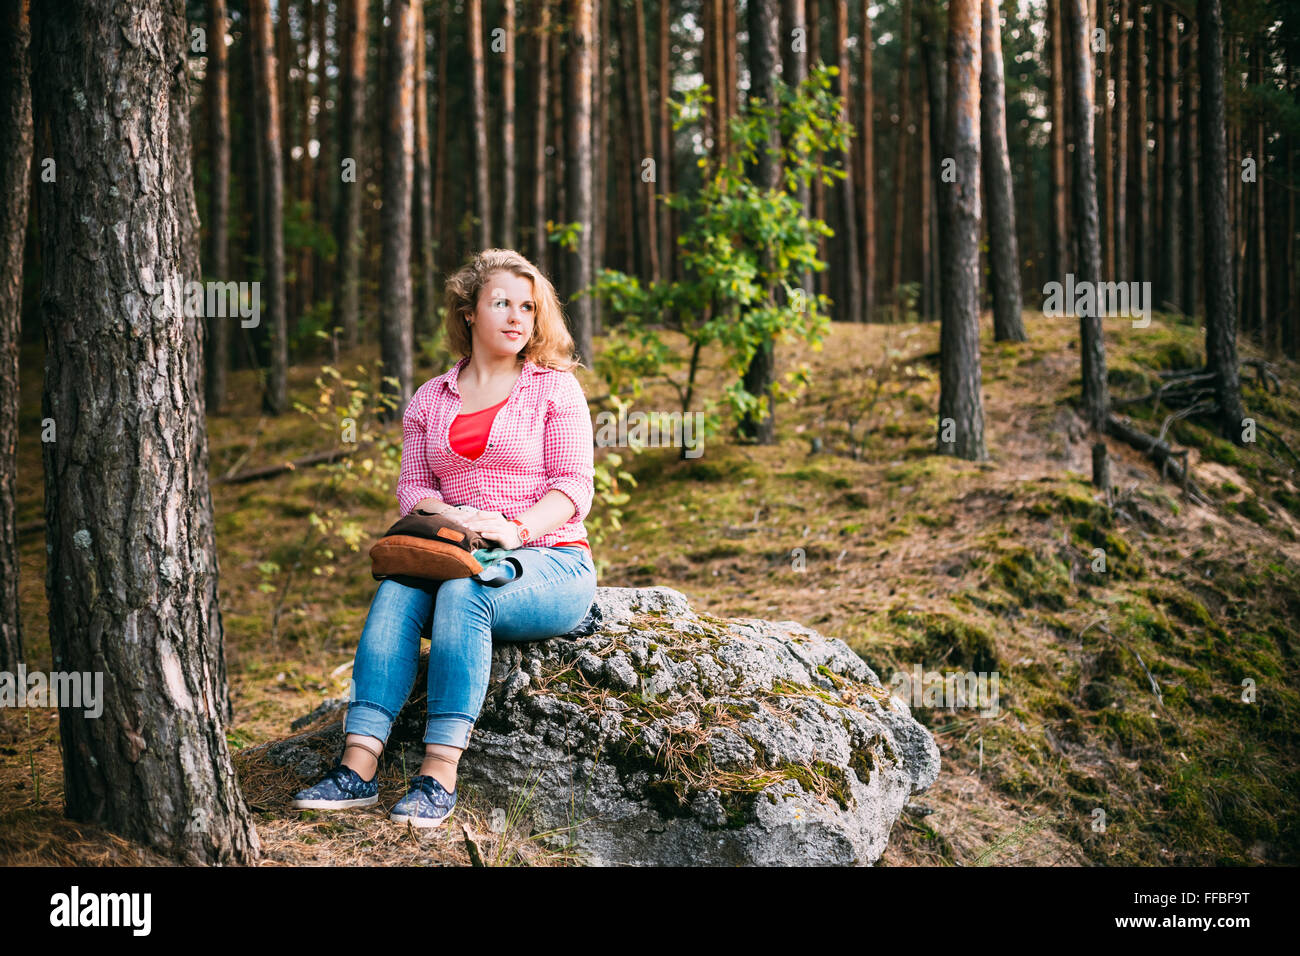 Beautiful Plus Size Young Woman In Shirt Sitting on Stone inSummer Forest Stock Photo